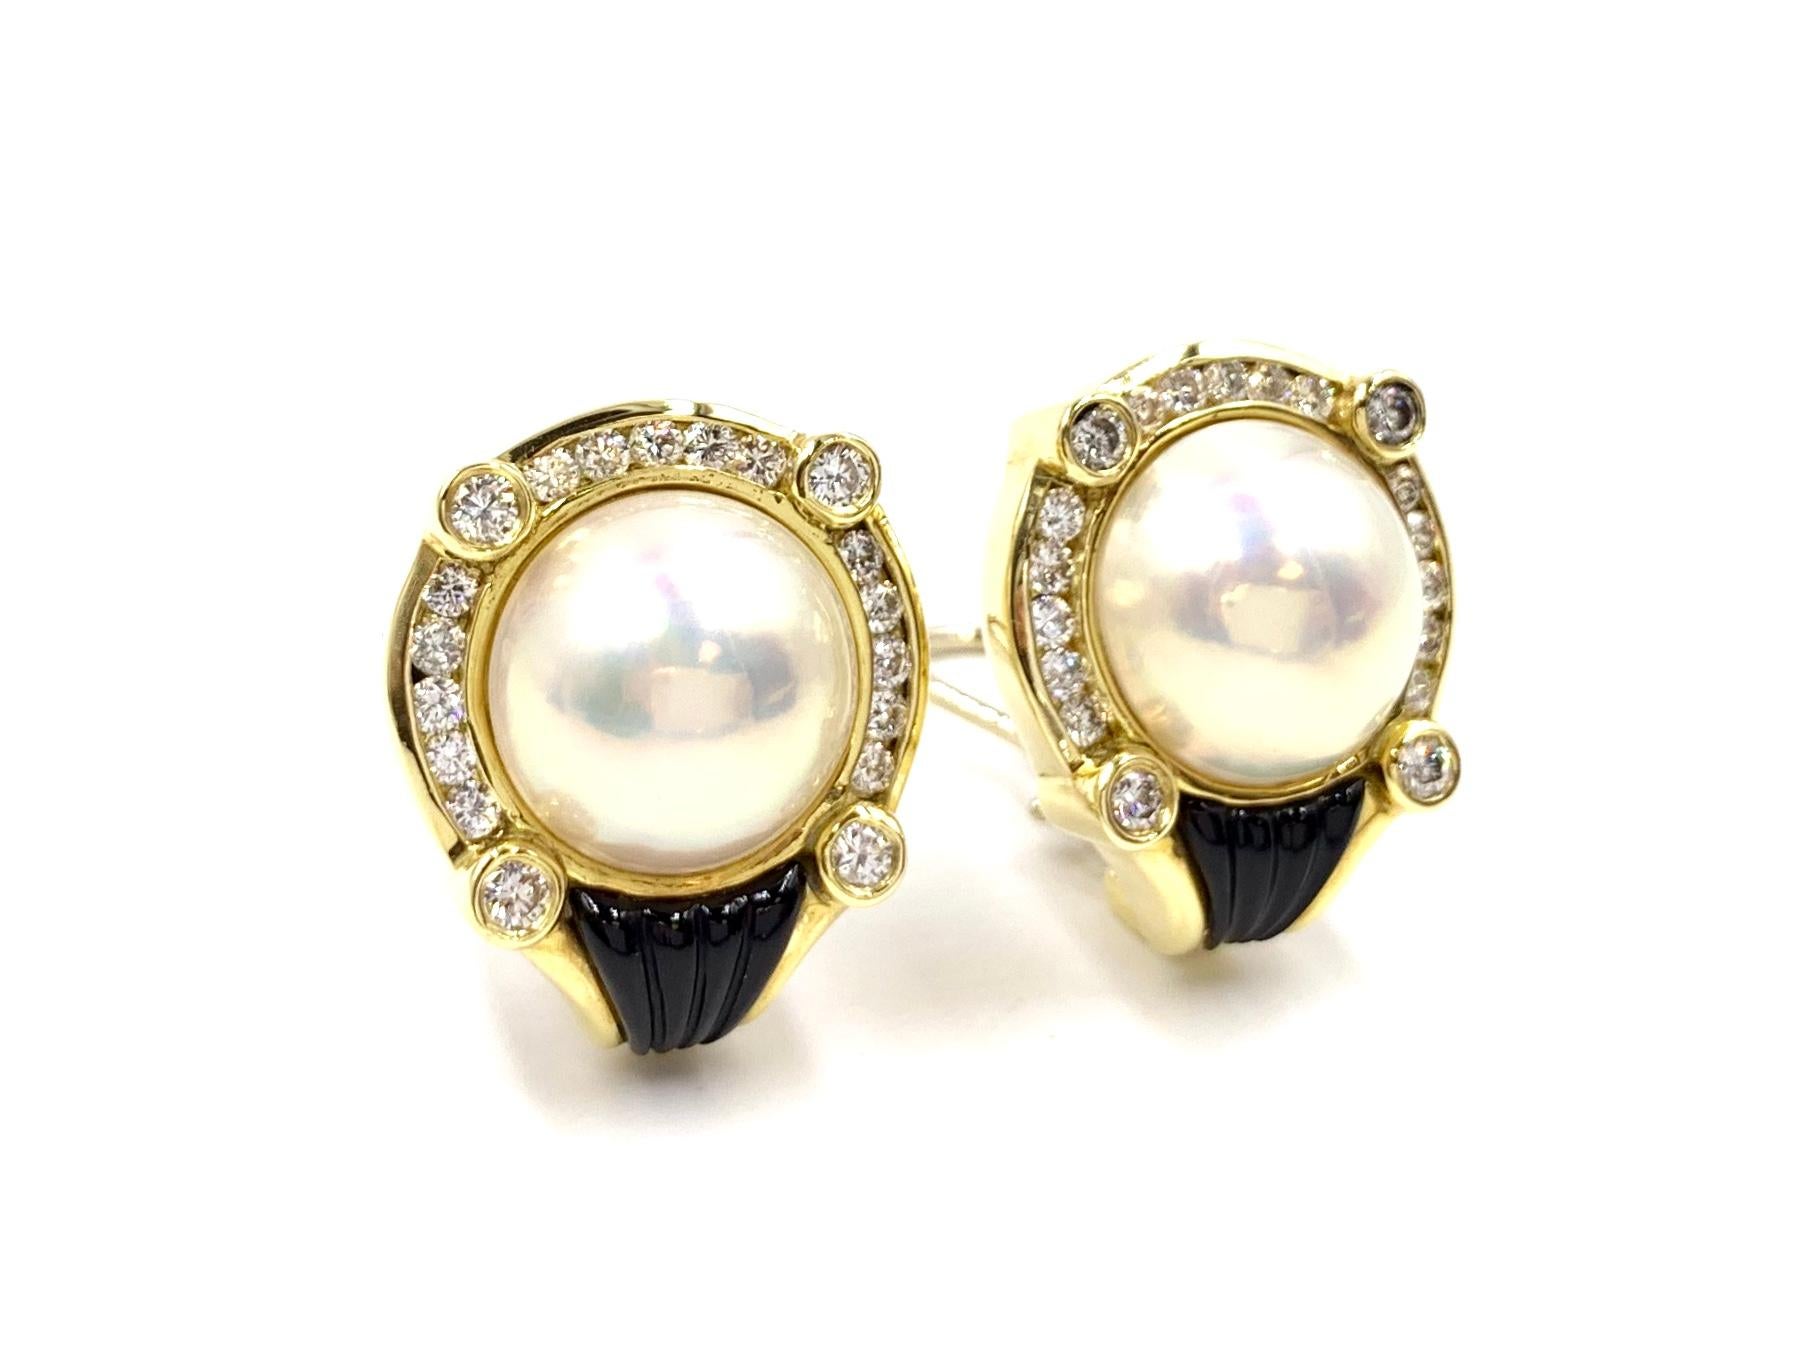 High quality 18 karat yellow gold button style earrings featuring a lustrous mabe pearl, bright white diamonds and fluted black onyx, crafted by La Triomphe. 38 round brilliant diamonds have a total weight of 1.46 carats at approximately F color,